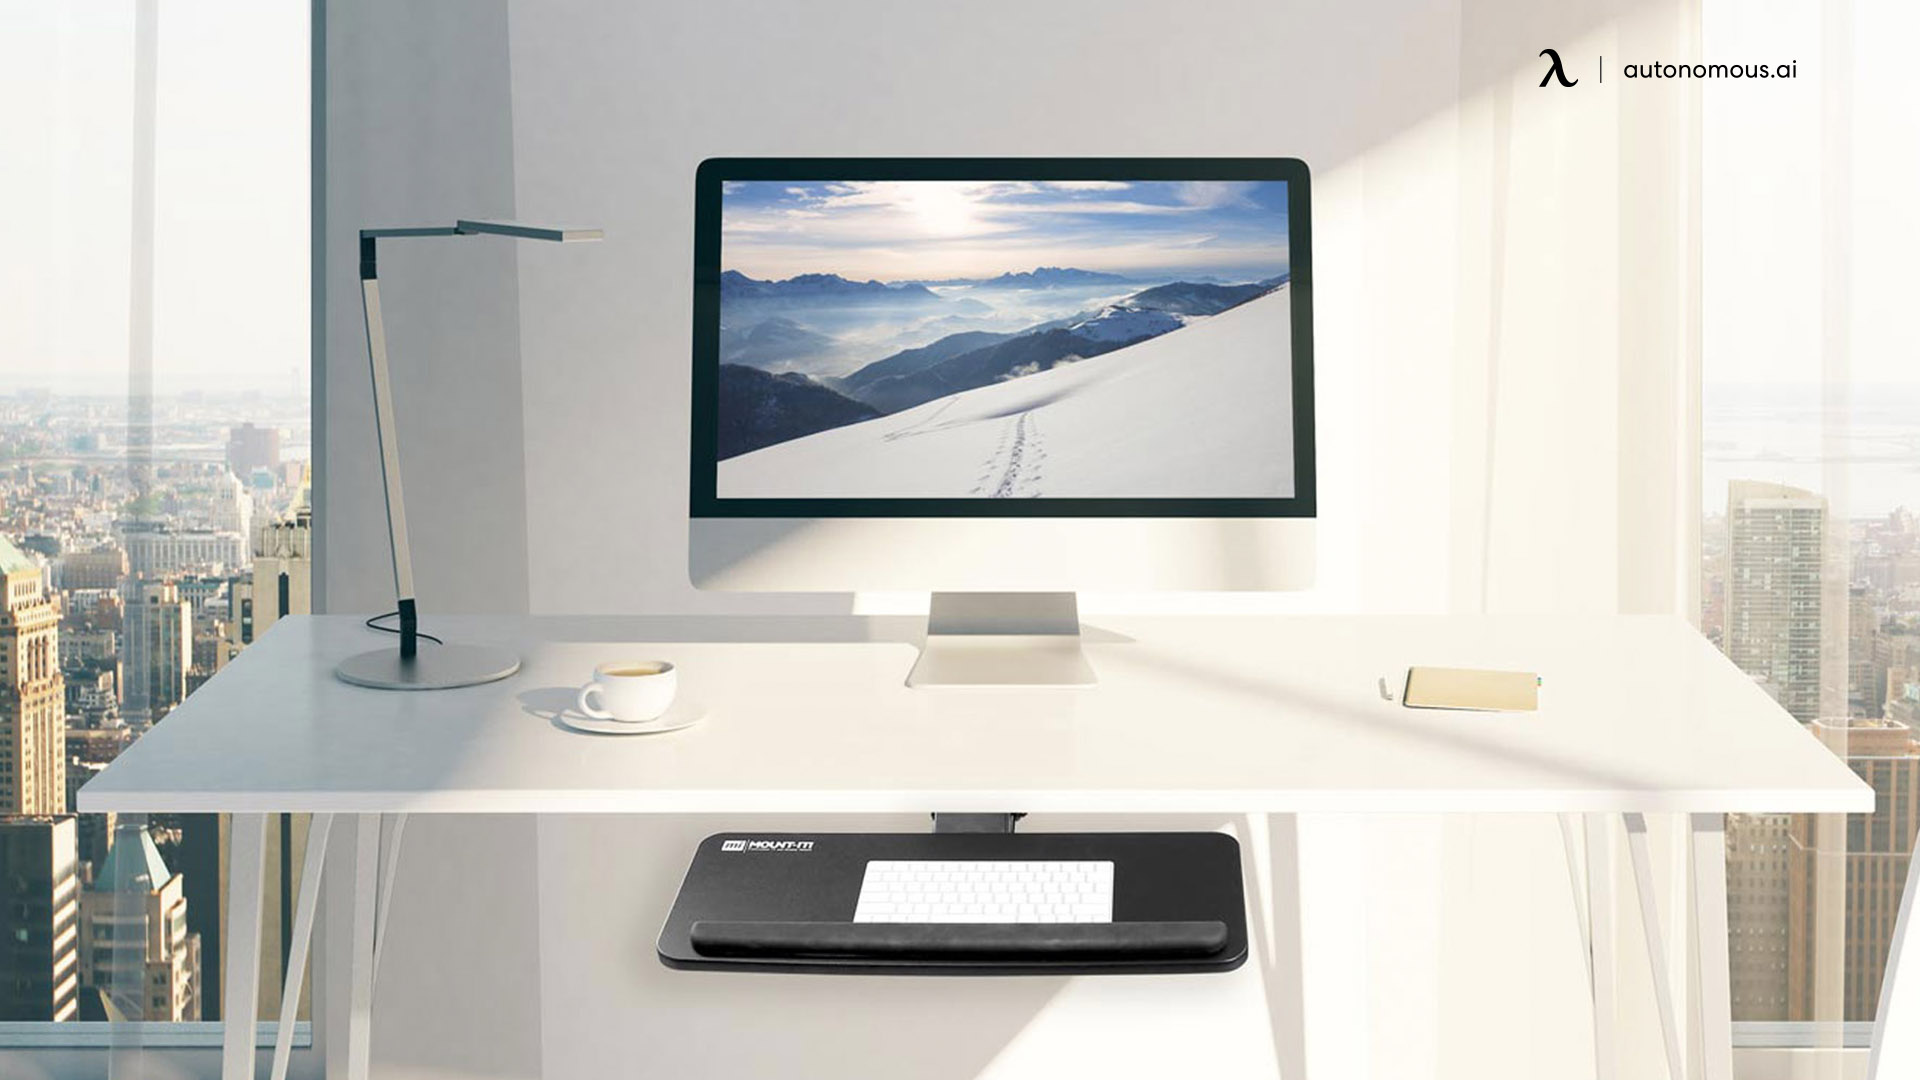 Work from Home Desk Accessories & Décor